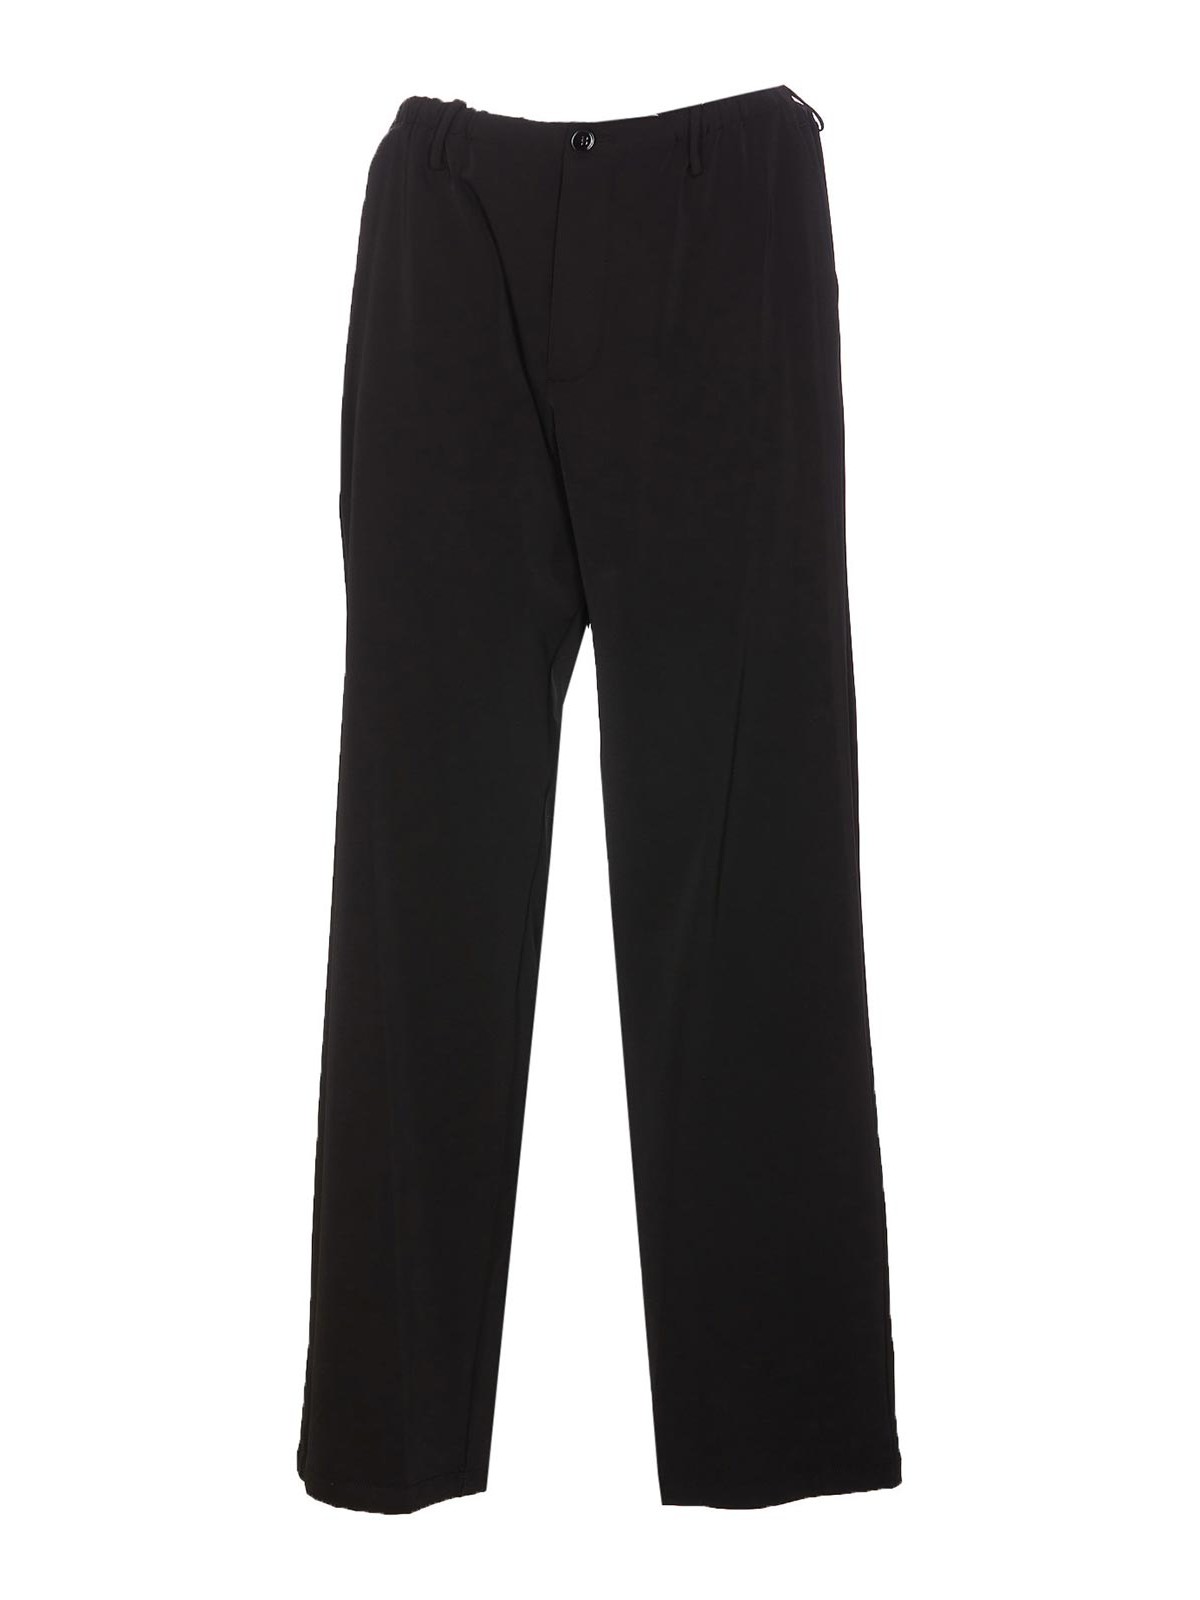 Mm6 Maison Margiela Black Pants With Frontal Button And Zip